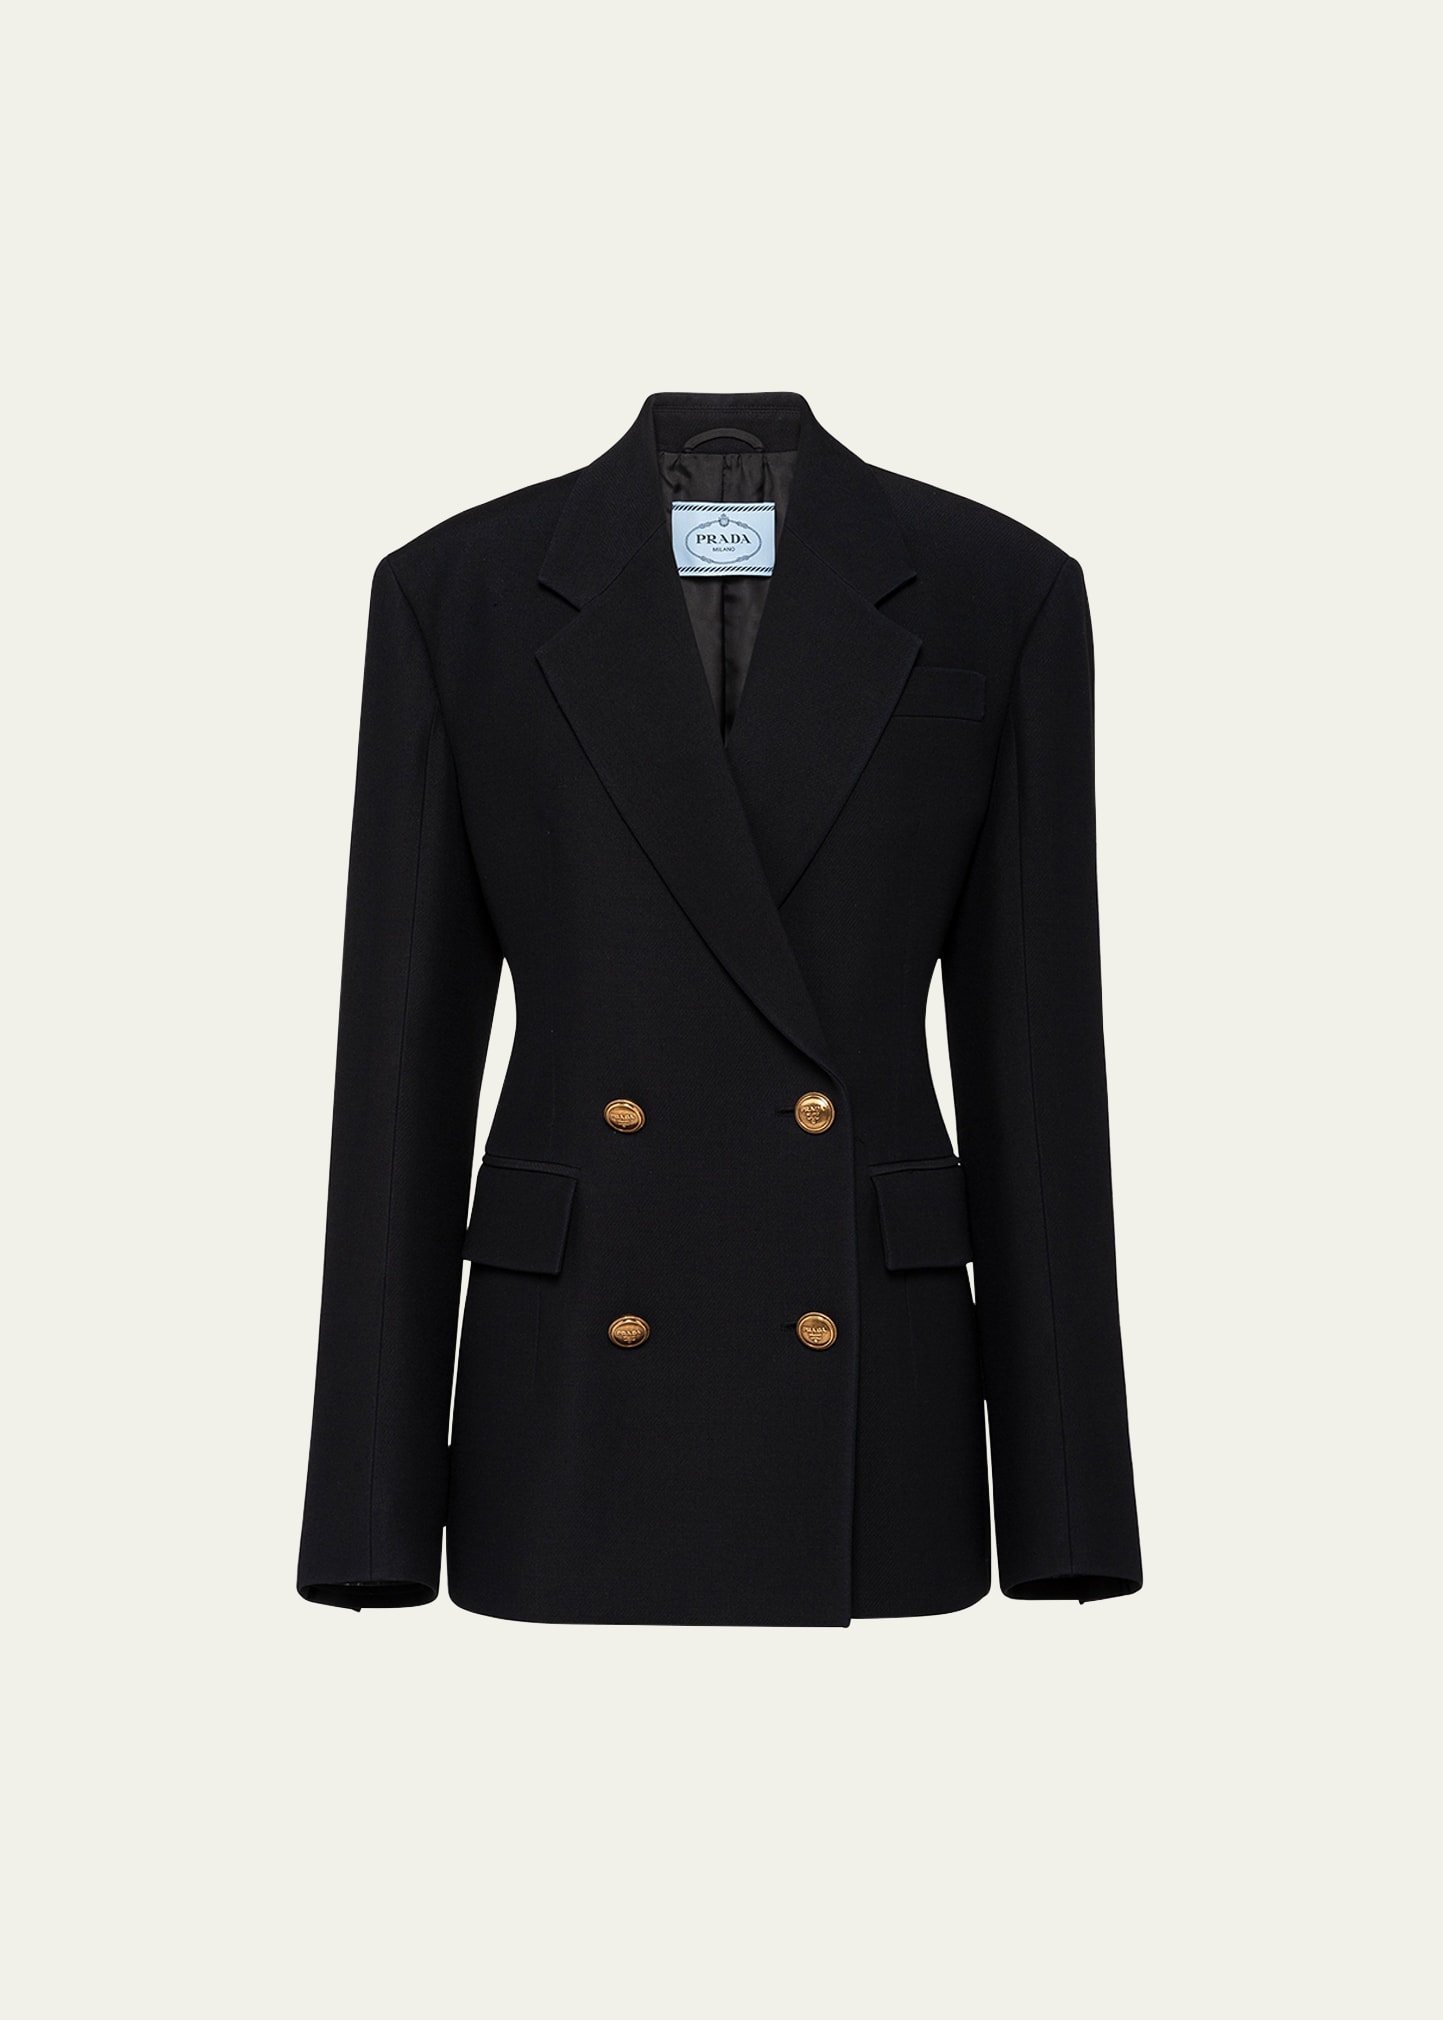 Prada Double-Breasted Wool and Silk Jacket